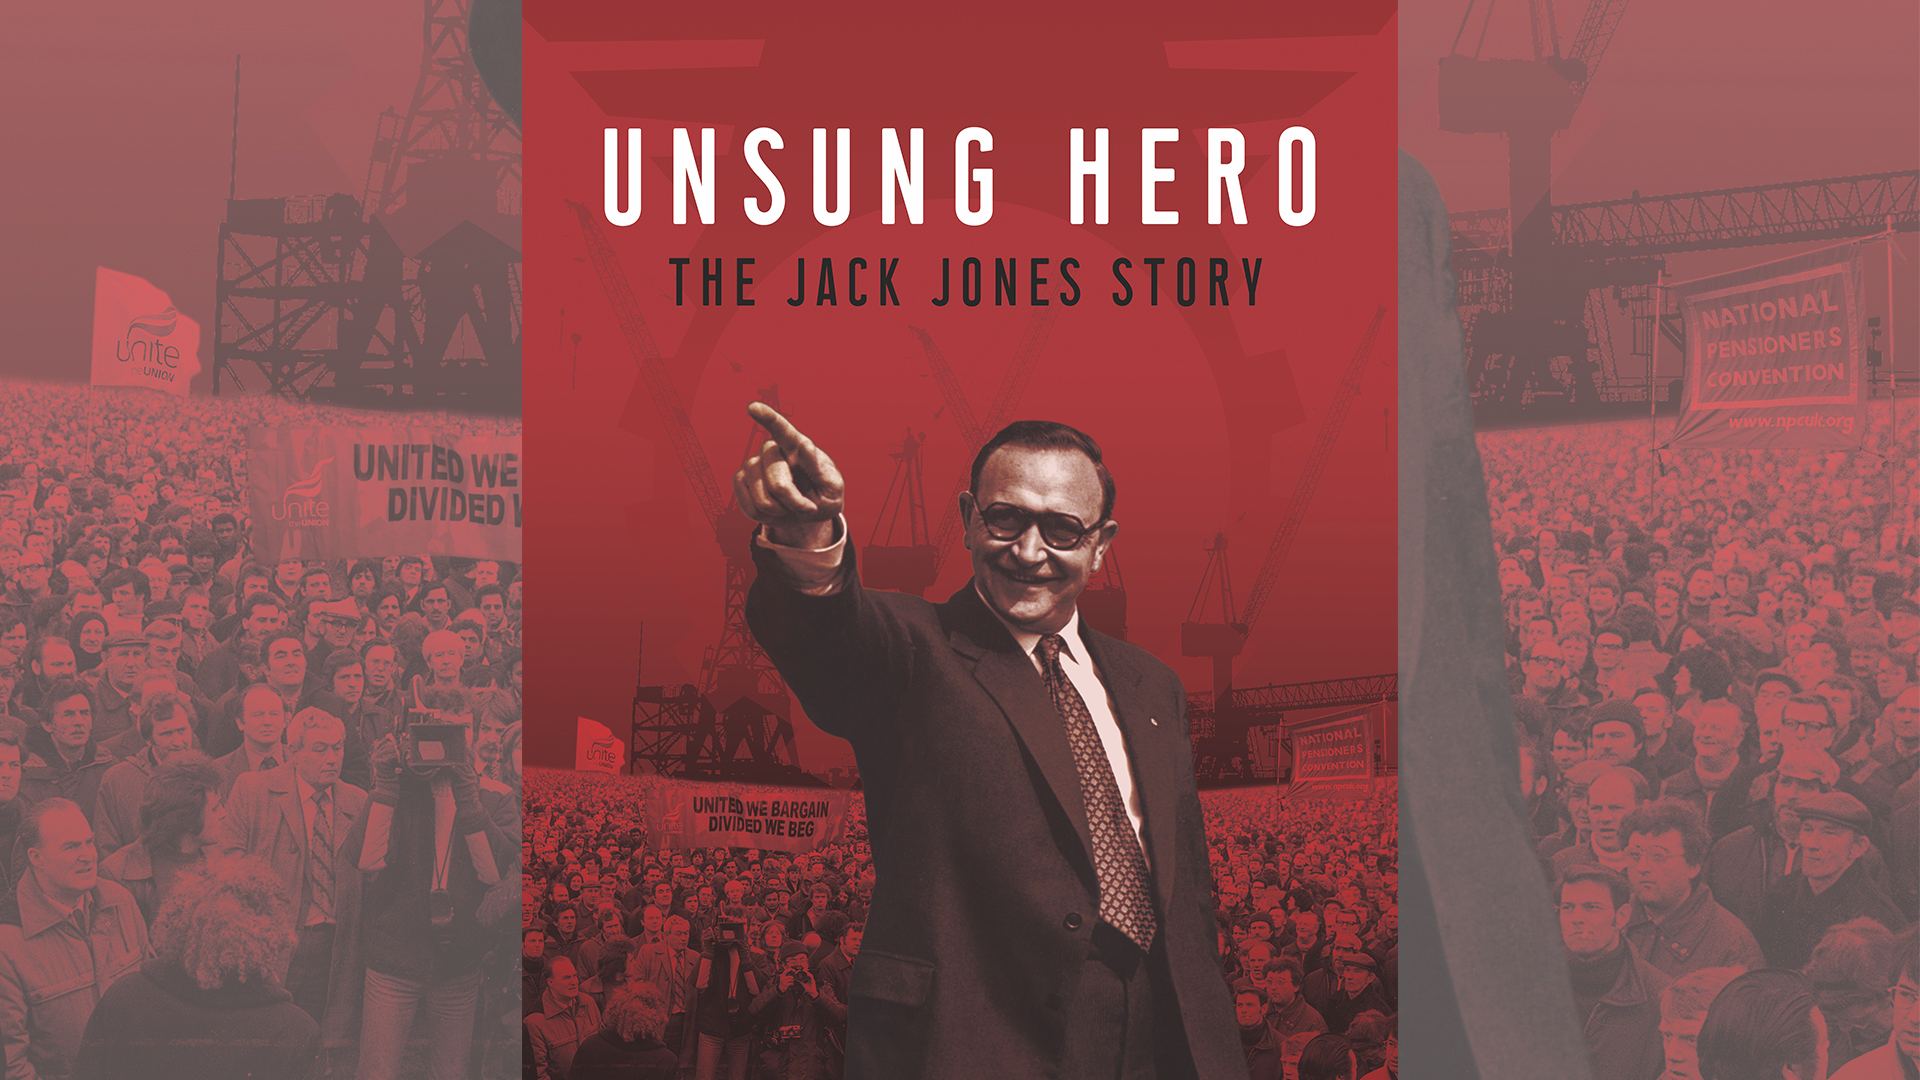 Film honouring “world’s greatest trade union leader” premieres in ...